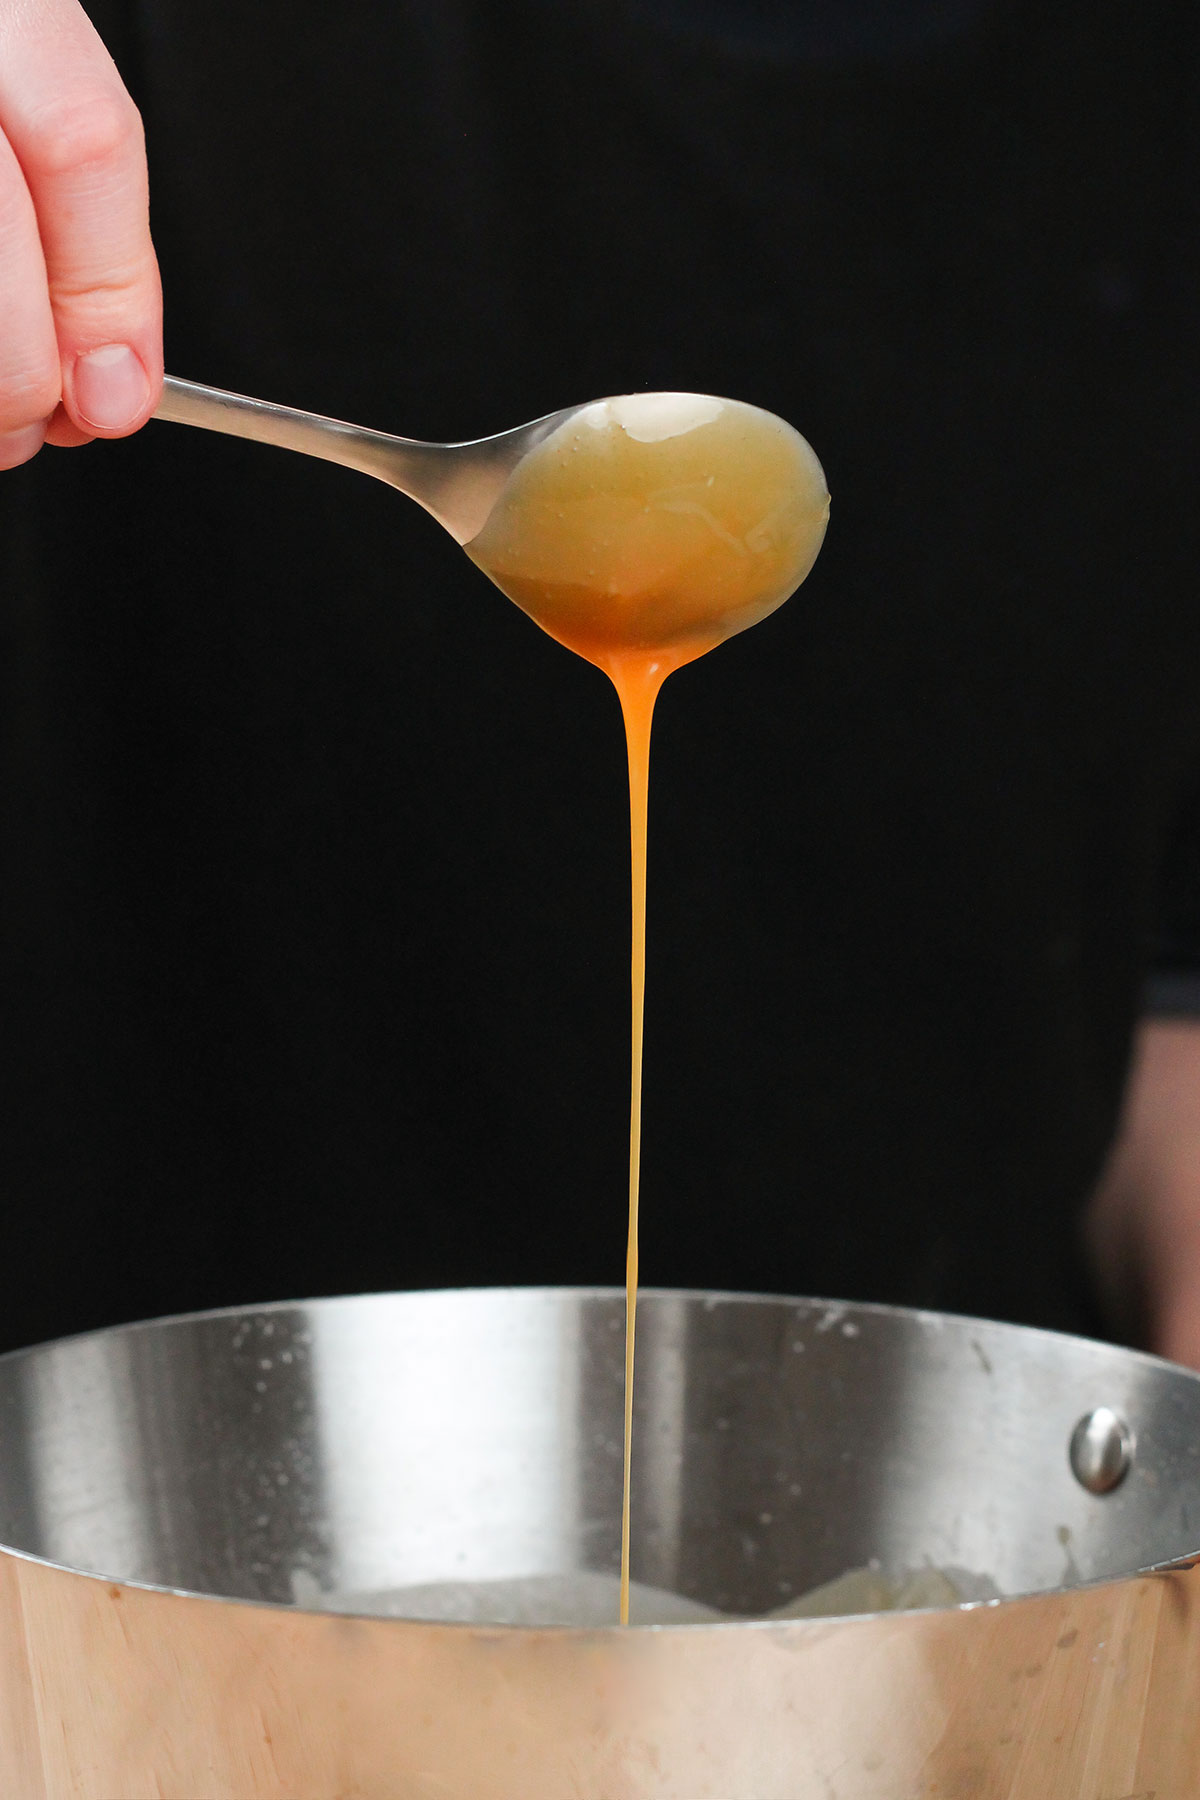 spoonful of caramel sauce dripping into pot